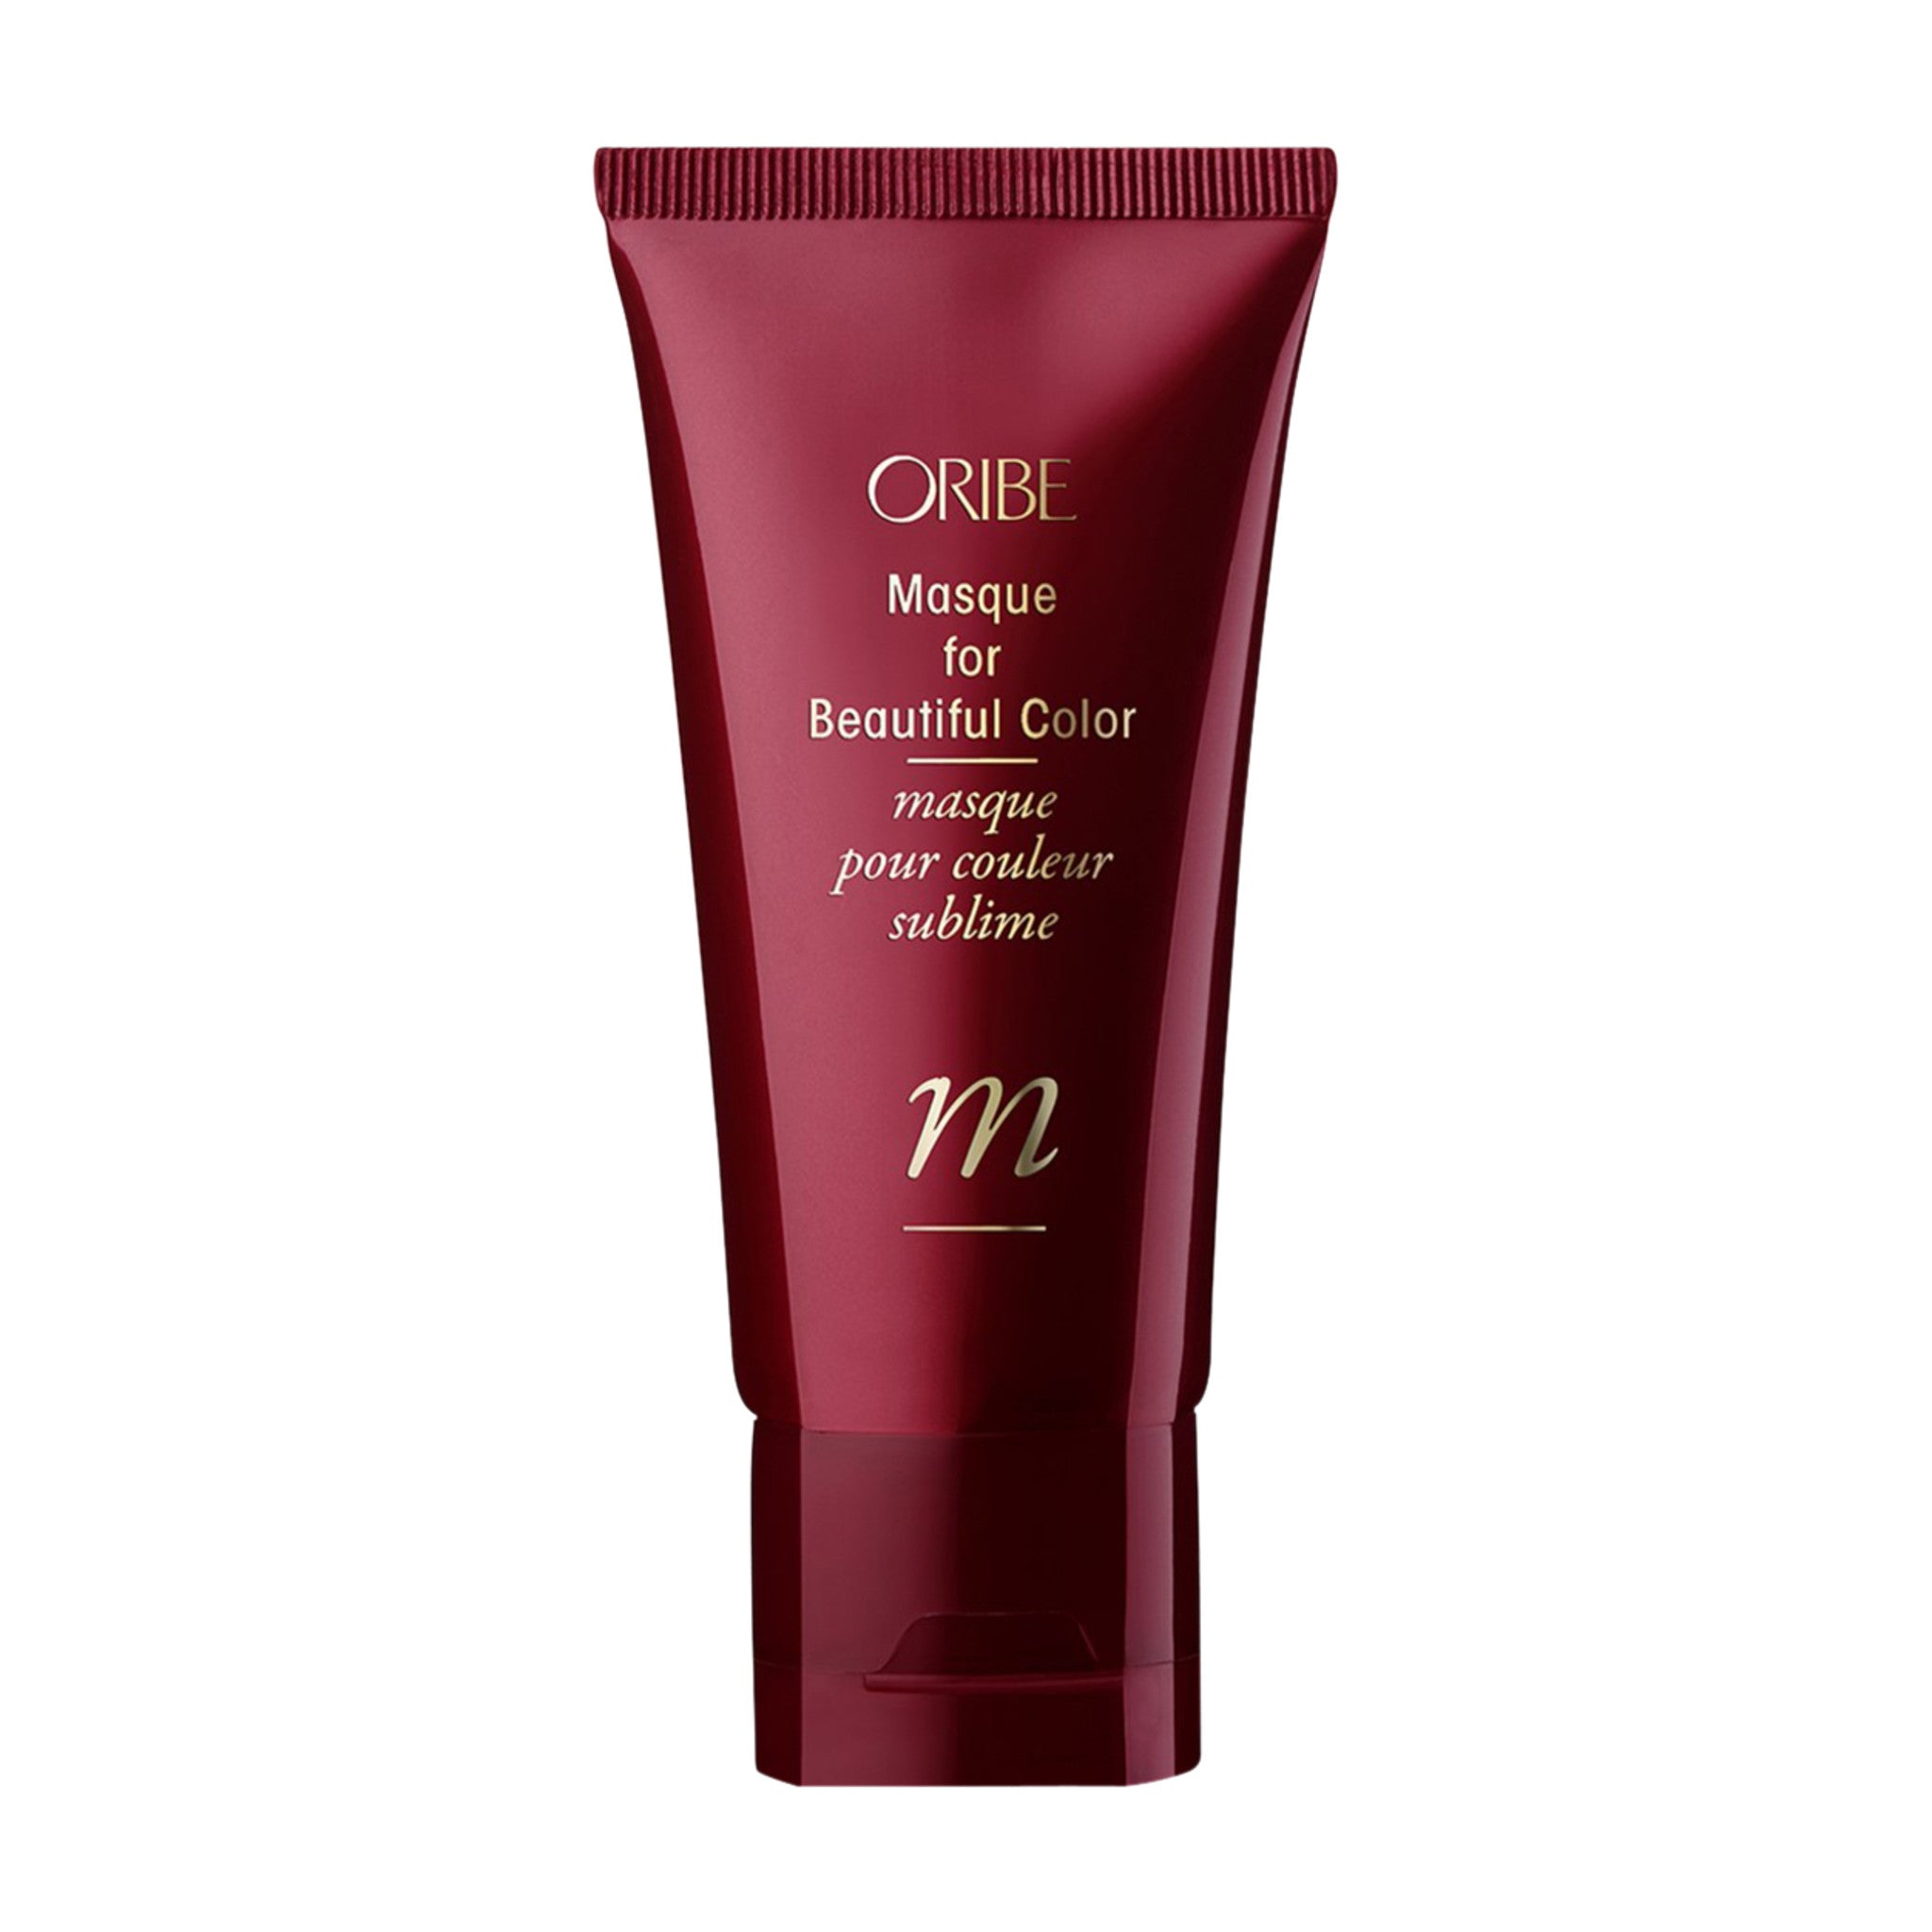 Oribe Masque For Beautiful Color Size variant: 1.7 oz main image.